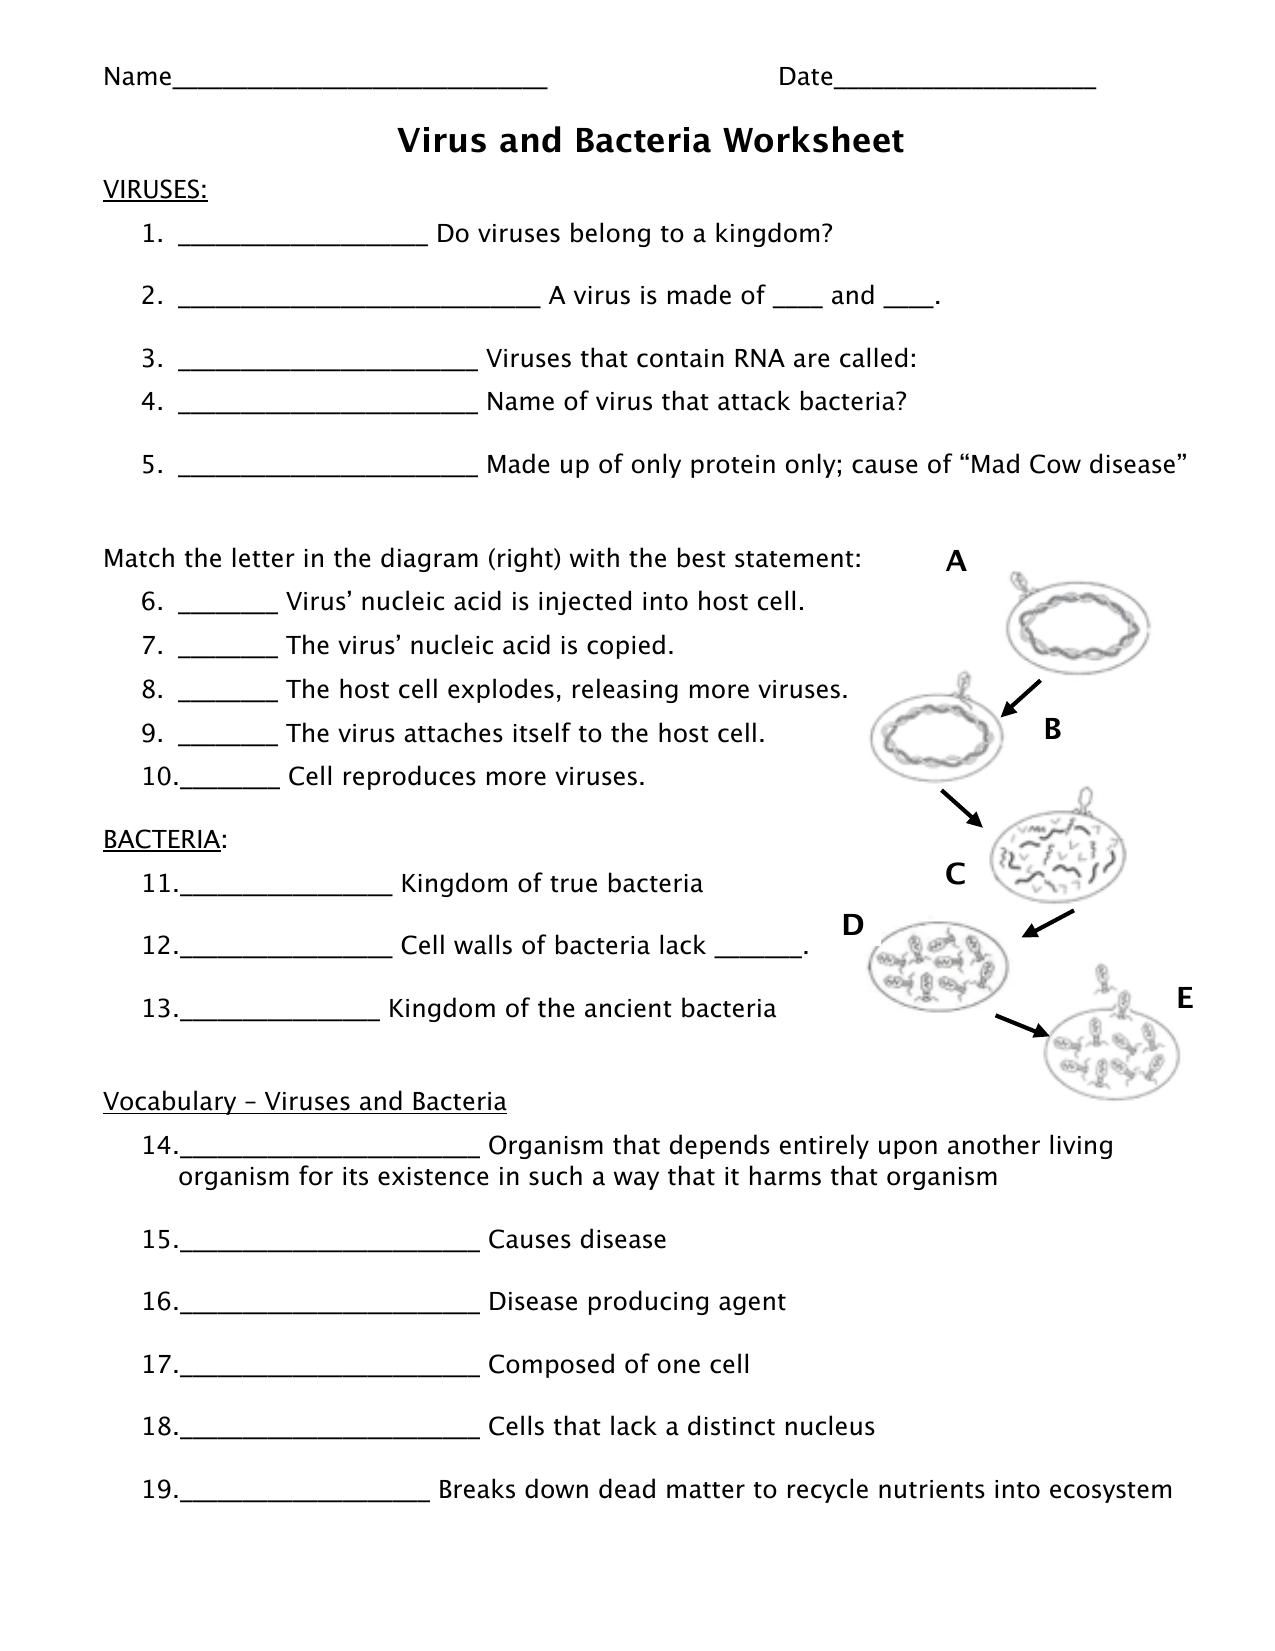 BACTERIA - Virus and Bacteria worksheet With Regard To Virus And Bacteria Worksheet